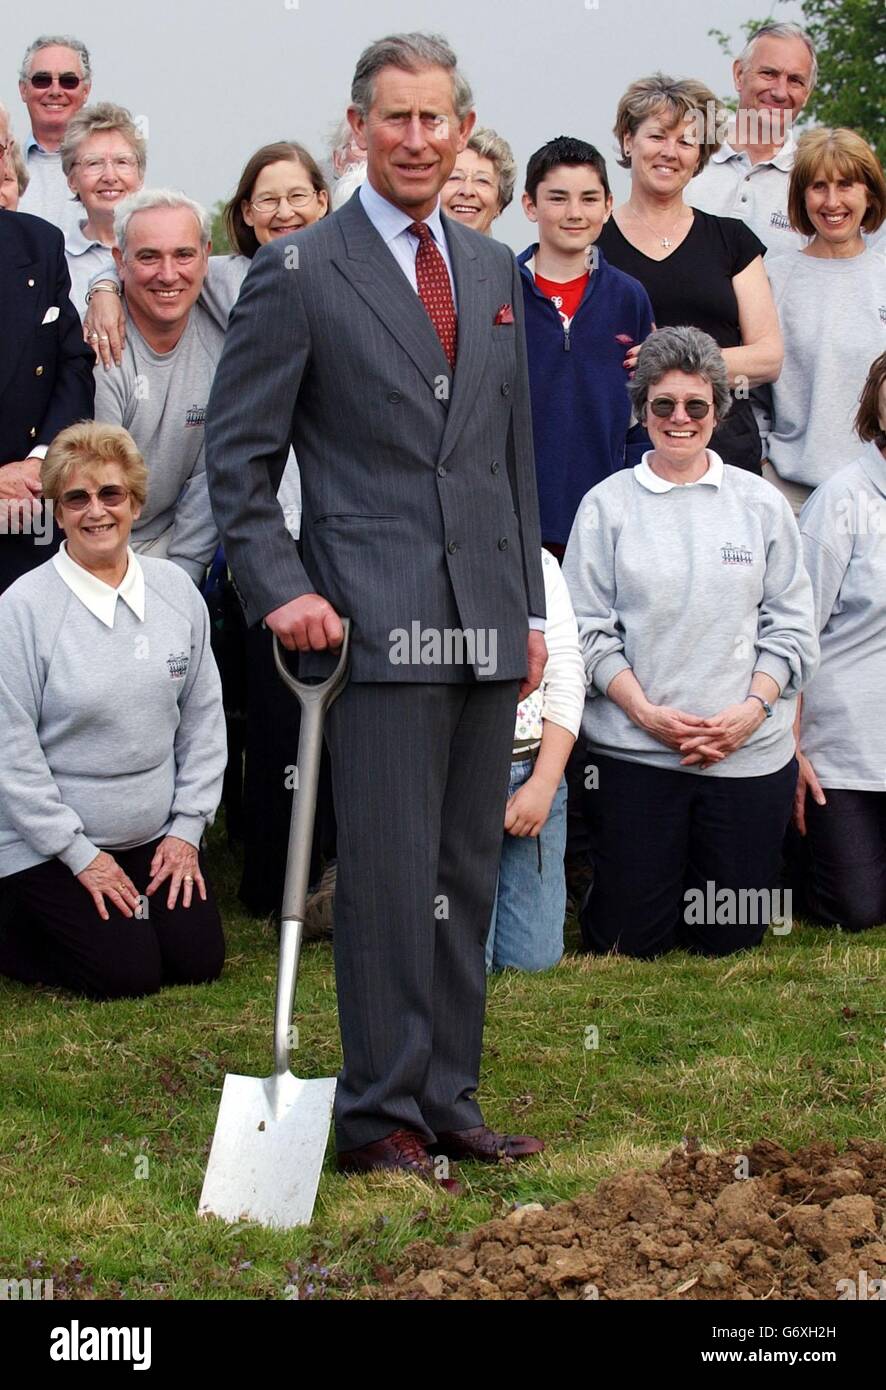 The Prince of Wales, who is Patron of the Georgian Group visits Copped Hall near Epping in Essex where he met volunteers restoring the 18th Century mansion house. at Cressing Temple in Essex, during his visit to the Cressing Estate. The site comprises of ancient barns and buildings and was restored in 1987 by the county council. The Royal visitor was there in 1991 but returns today to see extra work including the development of a Tudor garden. Stock Photo